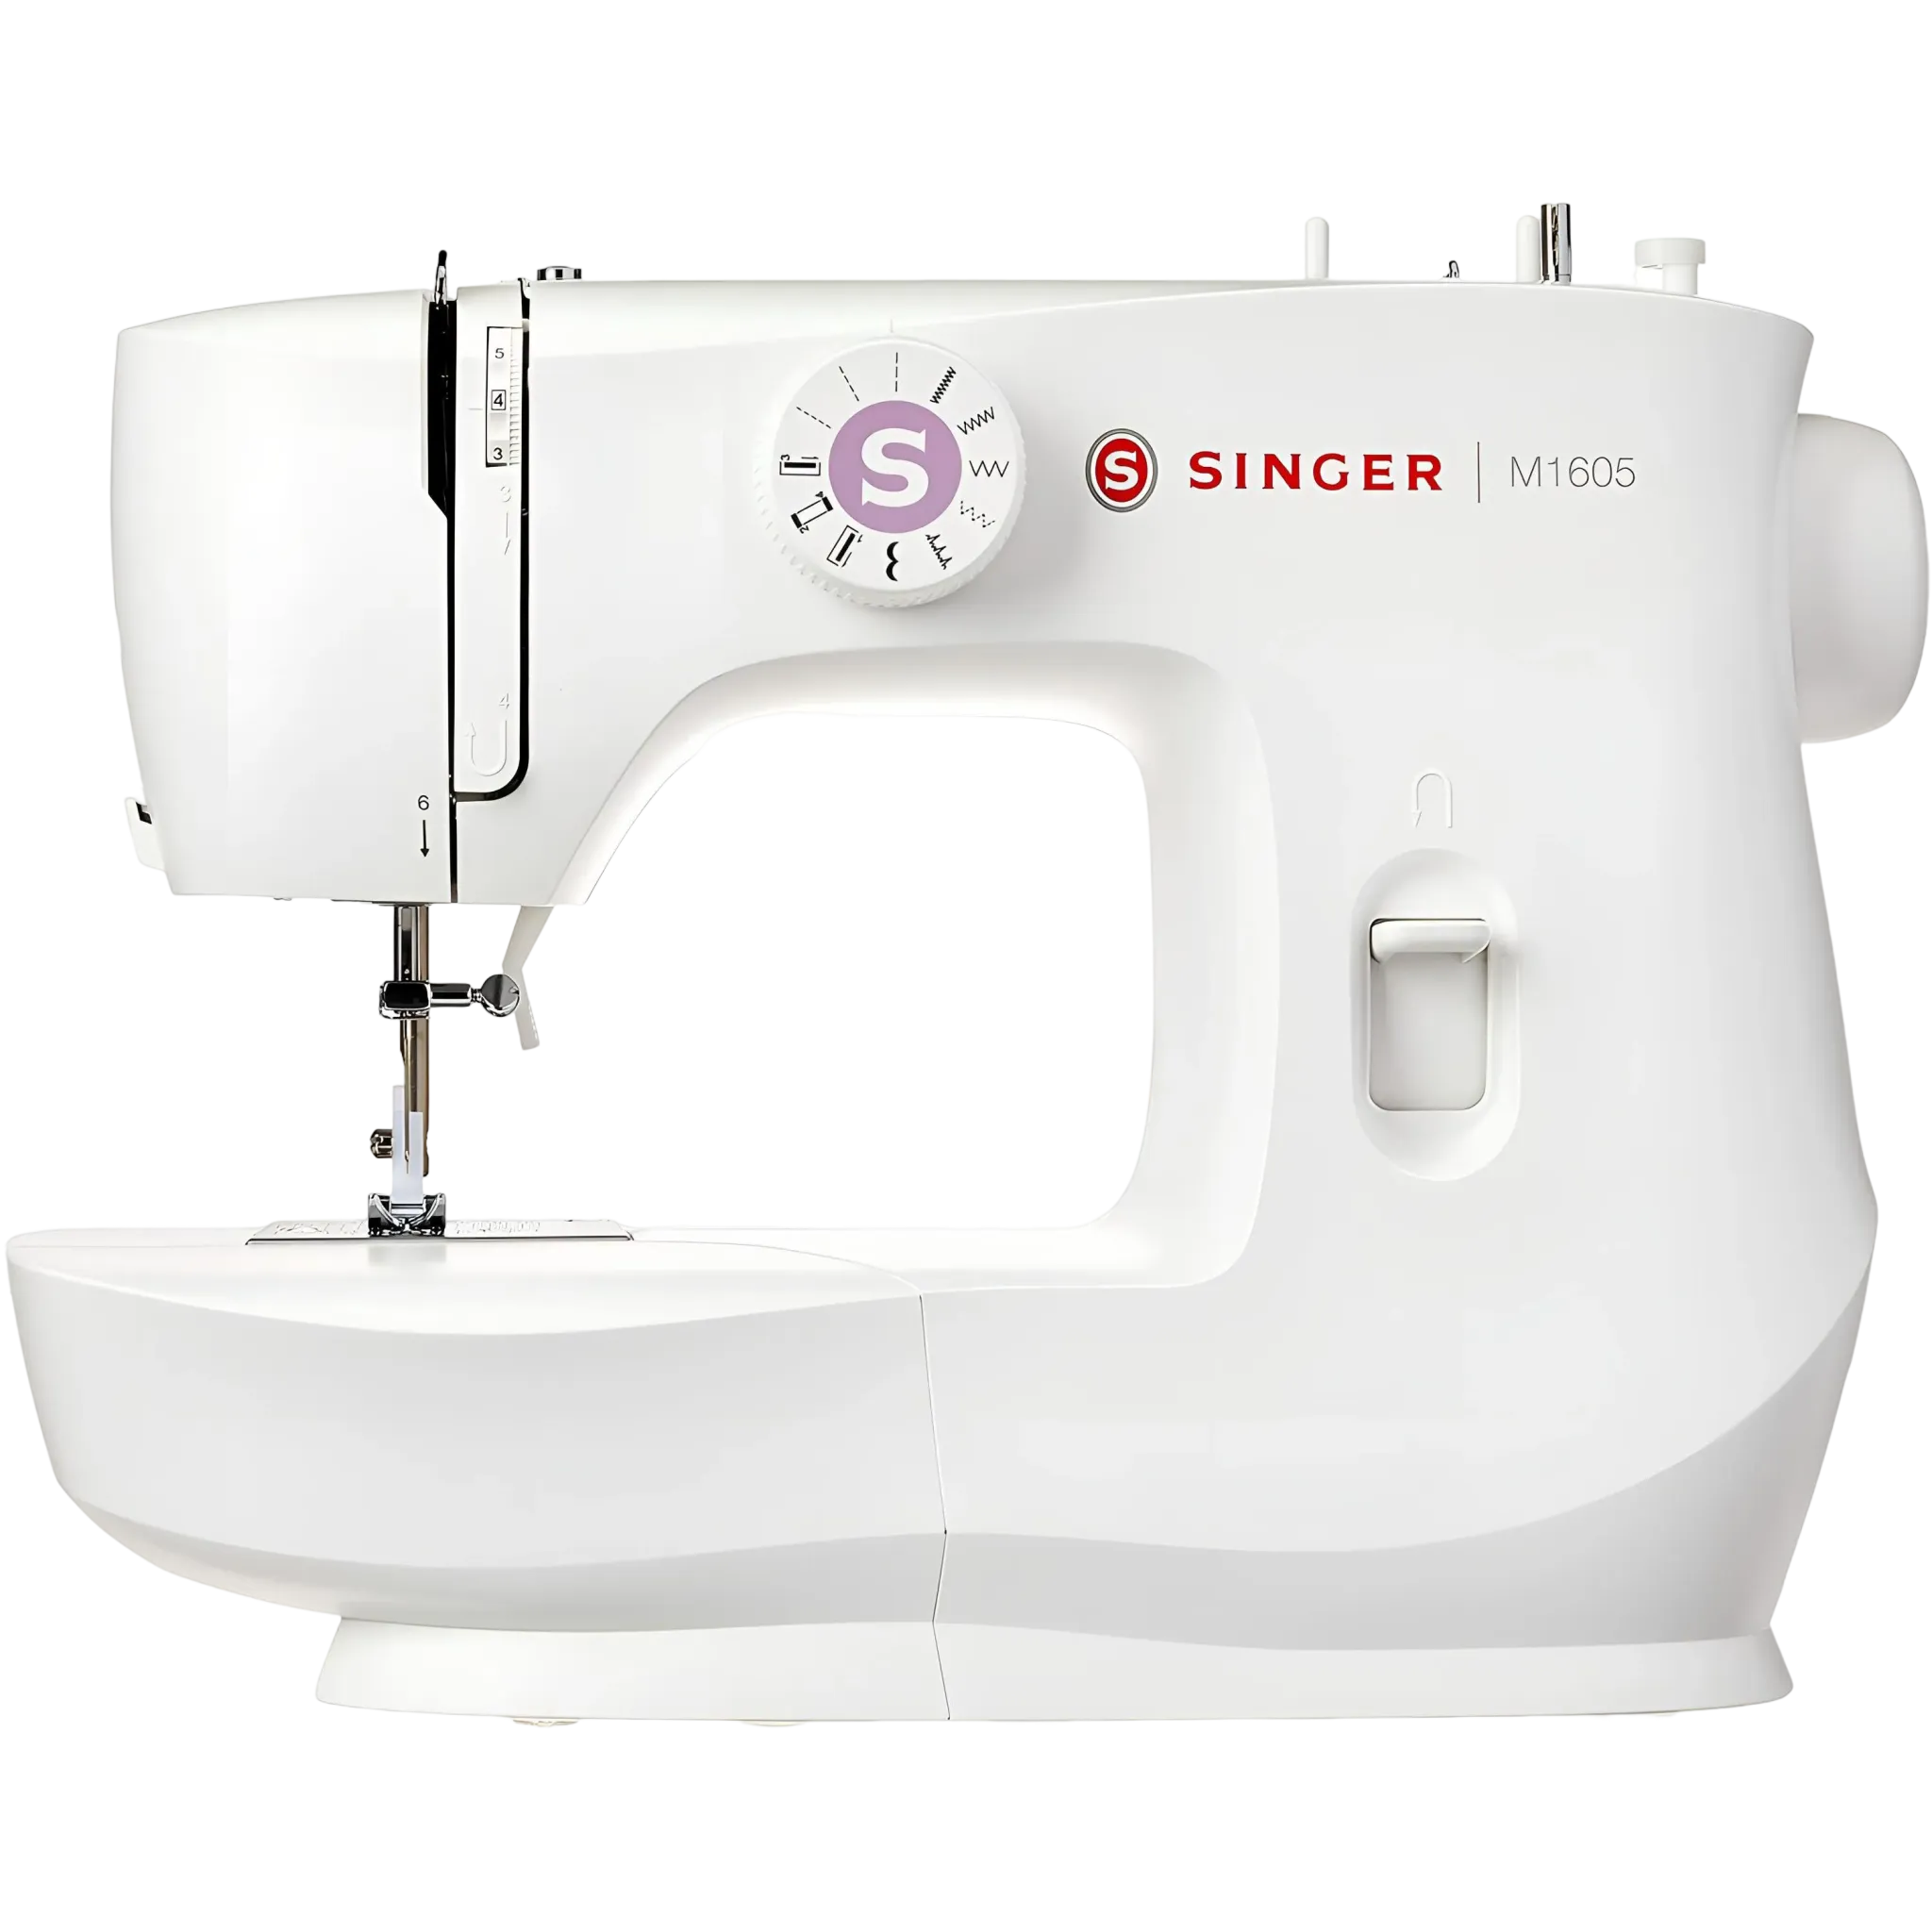 Singer Domestic Sewing Machine, 6 Built-In Stitches, Easy Stitch Selection, With Front Loading Bobbin & Adjustable Thread Tension Dial – M1605 White